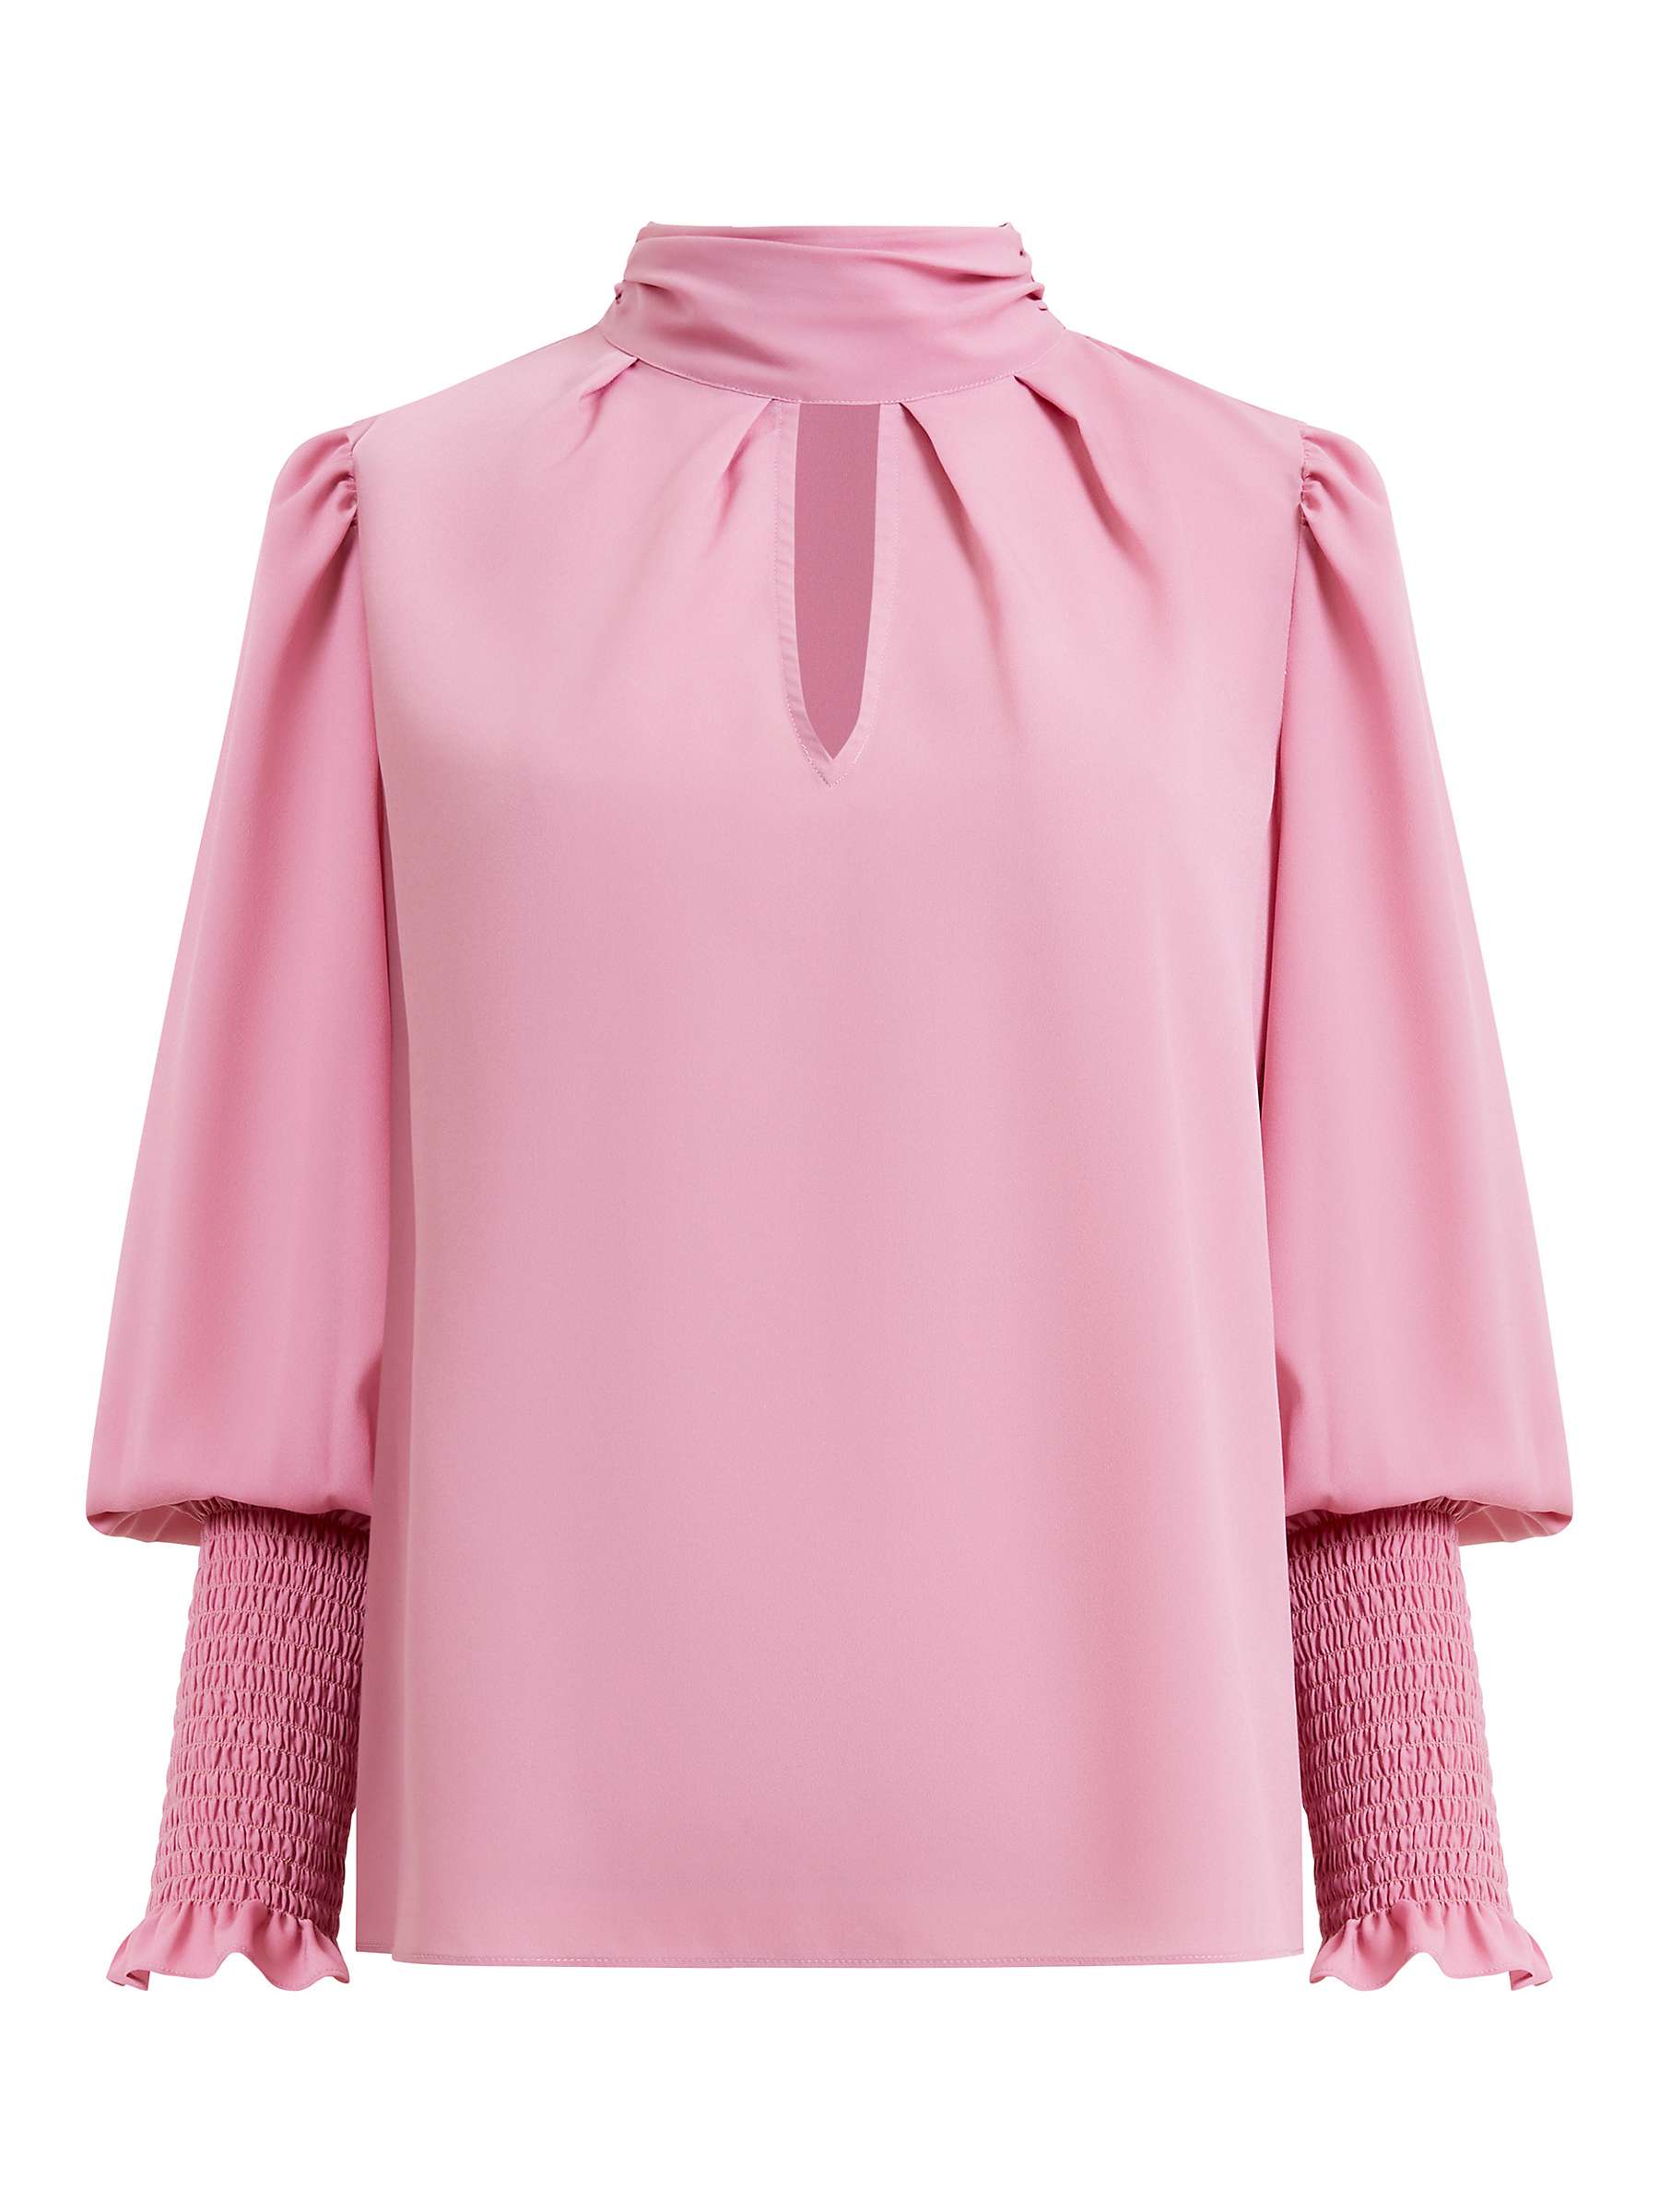 Buy French Connection Crepe High Neck Top Online at johnlewis.com